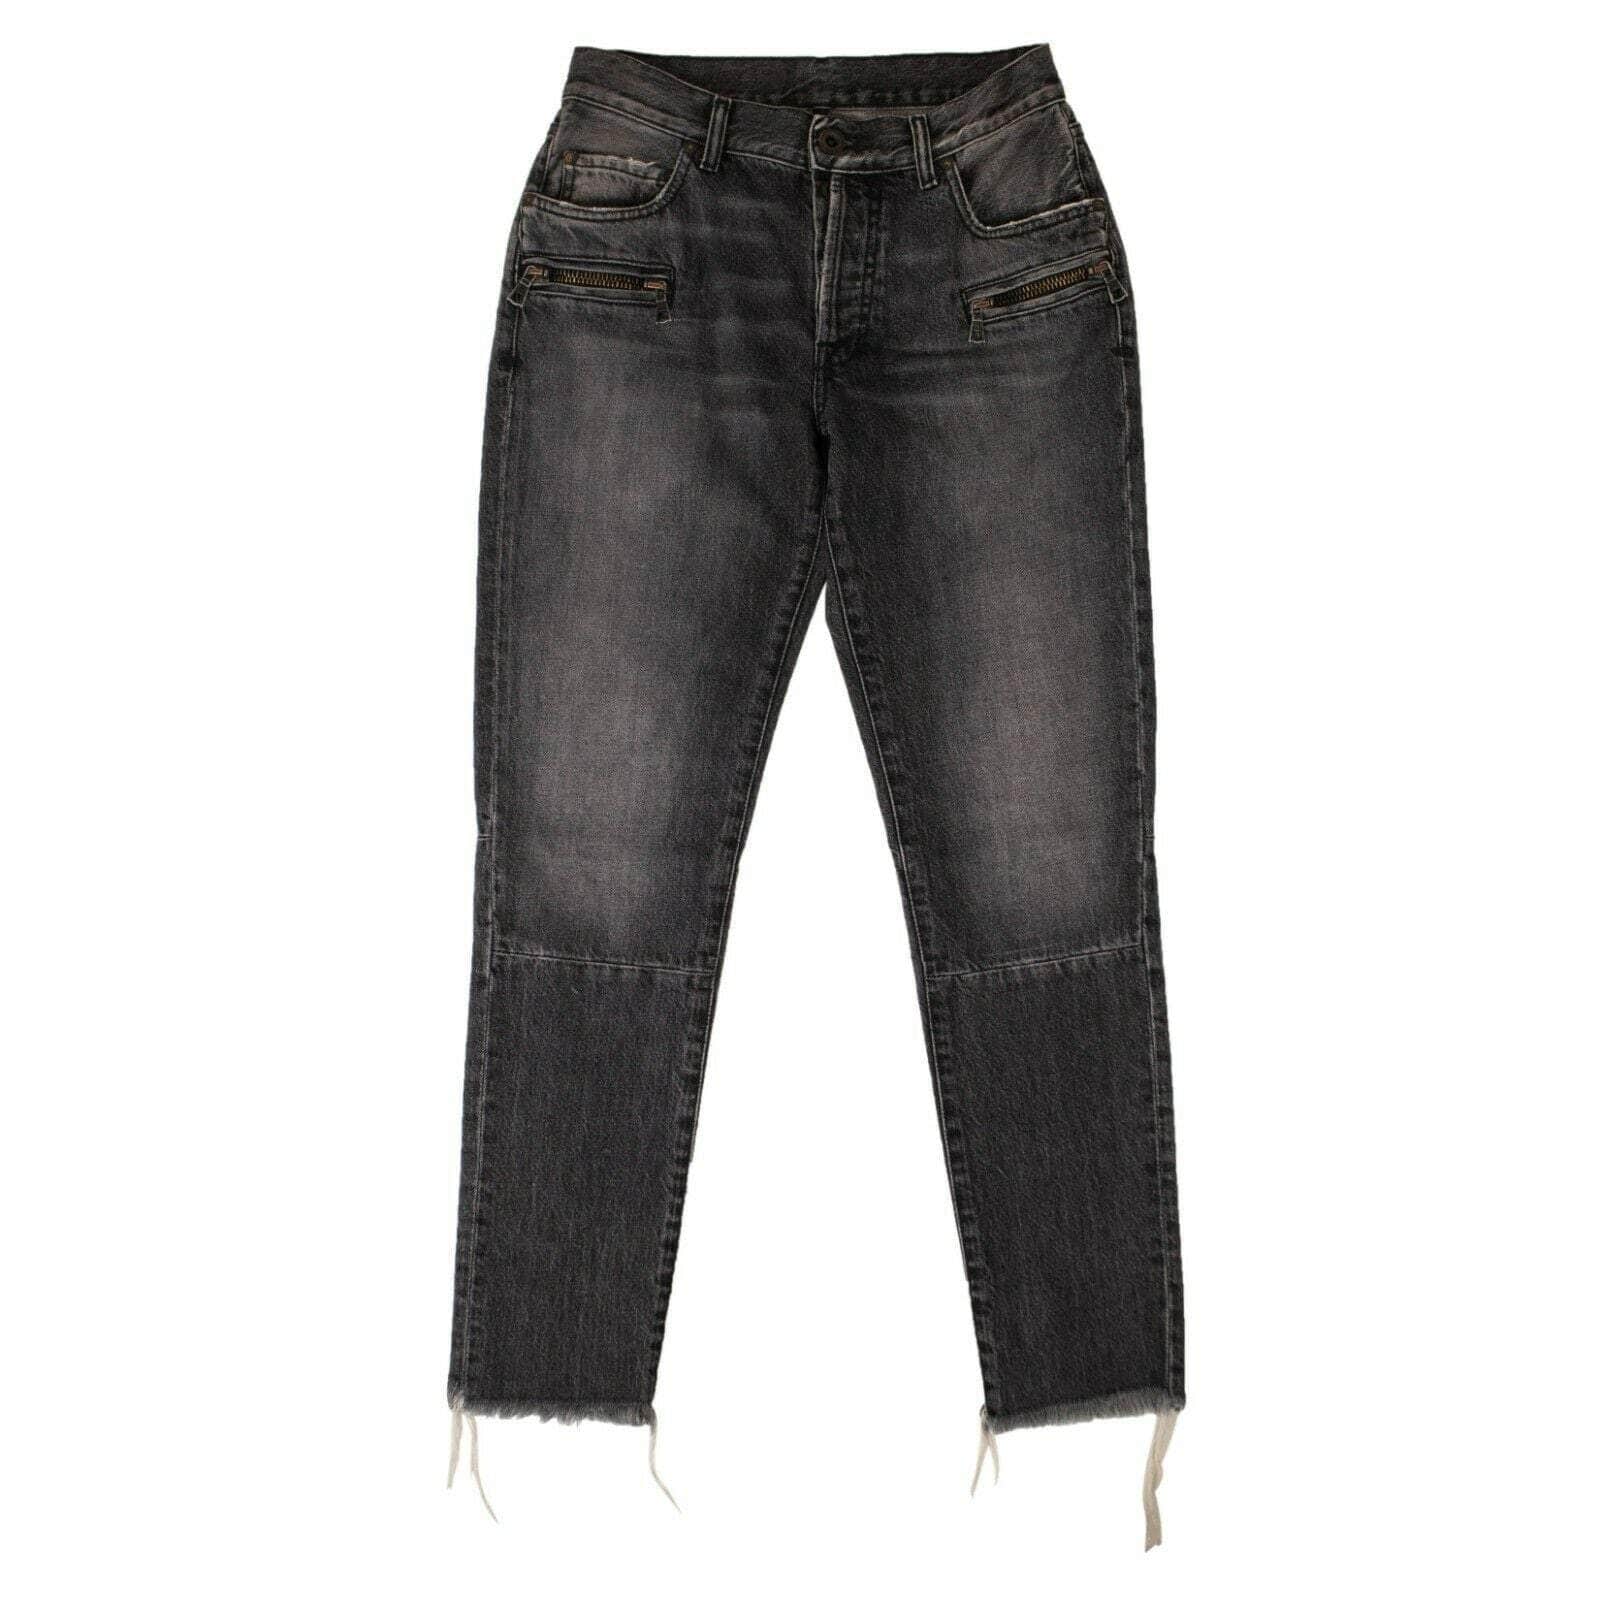 UNRAVEL PROJECT channelenable-all, couponcollection, gender-womens, main-clothing, sale-enable, size-26, under-250, unravel-project 26 Black Zipped Pockets Jeans 82NGG-UN-1190/26 82NGG-UN-1190/26